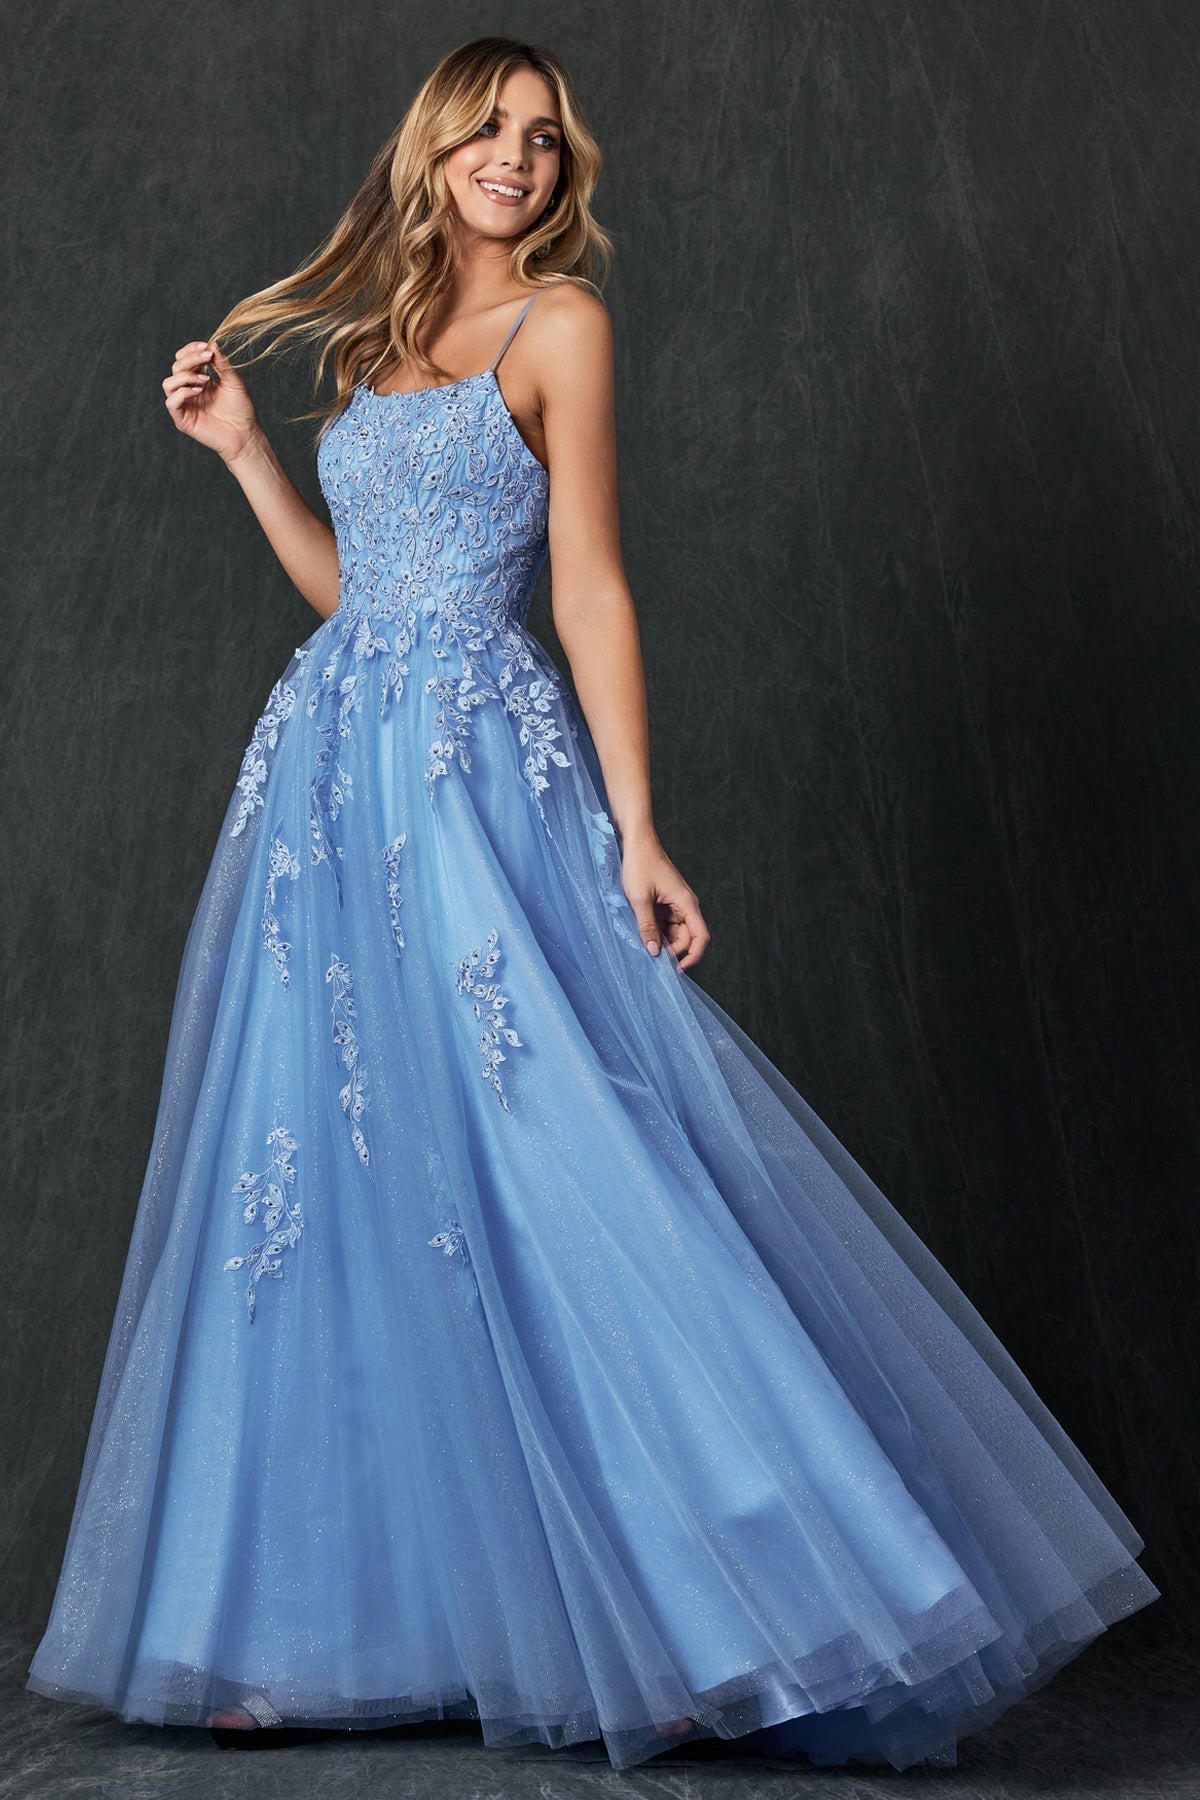 Straight Across Floral Applique Tulle Long Prom Dress JT260 Elsy Style Prom Dress